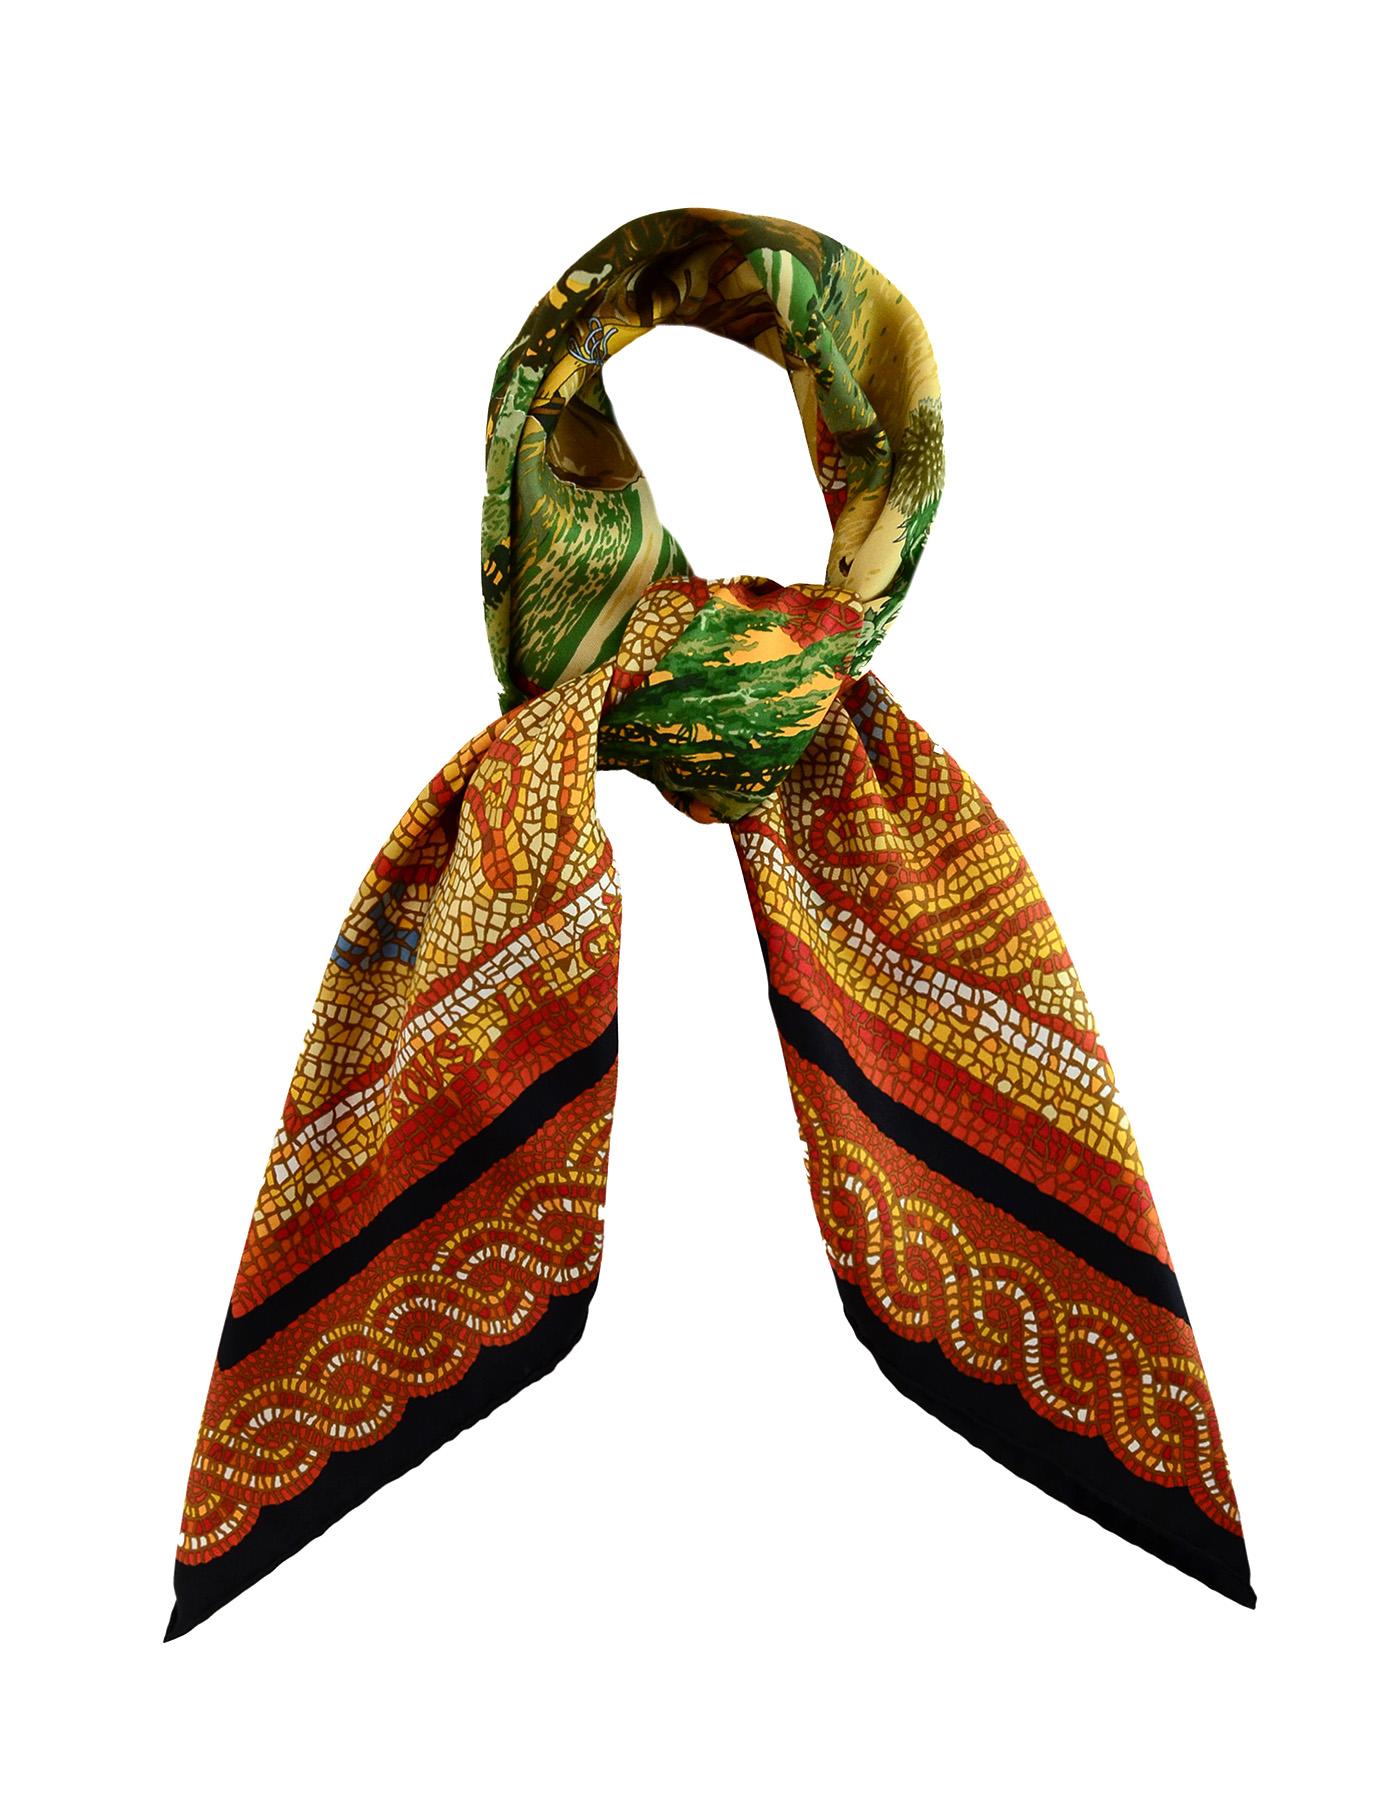 Hermes Orange/Yellow/Green Sous Le Cedre Mosaic Silk Scarf

Made In: France
Color: Orange, yellow, green
Materials:  100% silk
Overall Condition: Excellent pre-owned condition with small mark
Estimated Retail: $395 + tax

Measurements: 
34